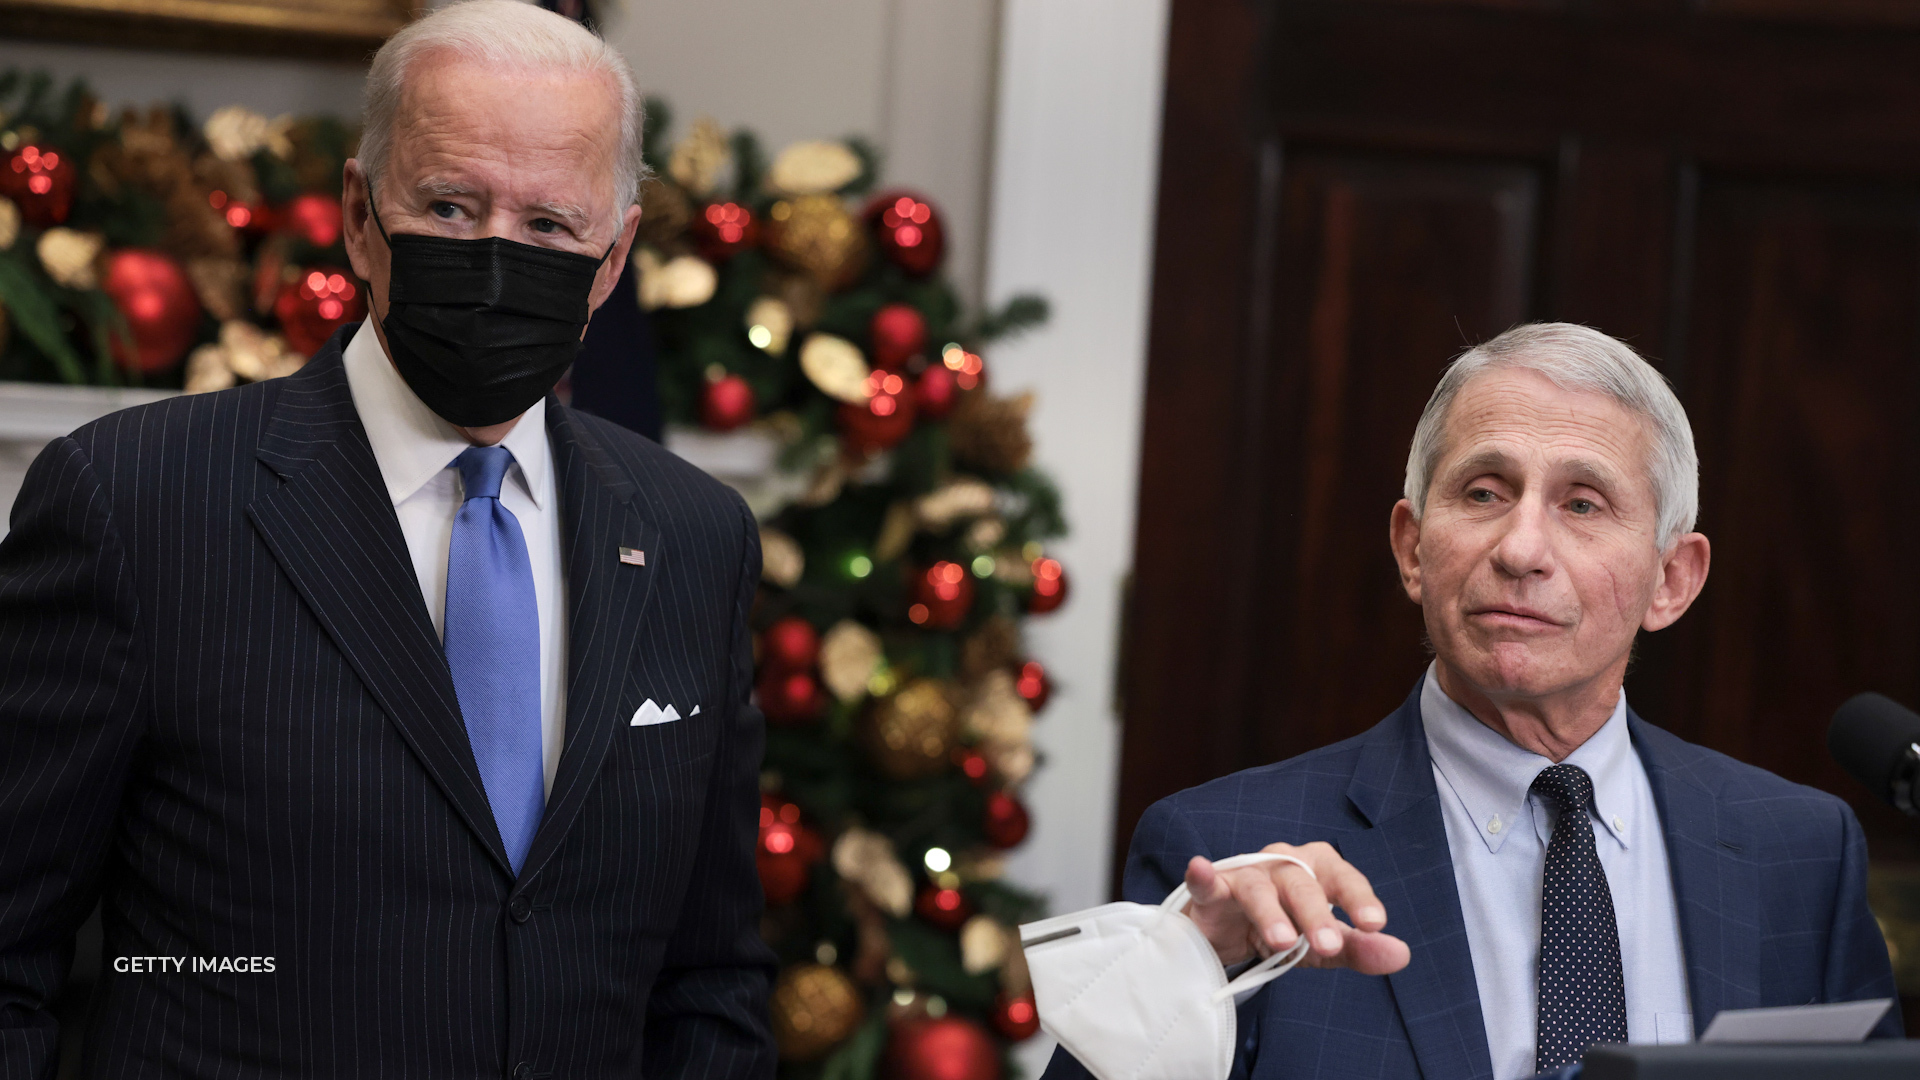 Biden pushed vaccination to fight the Omicron variant.